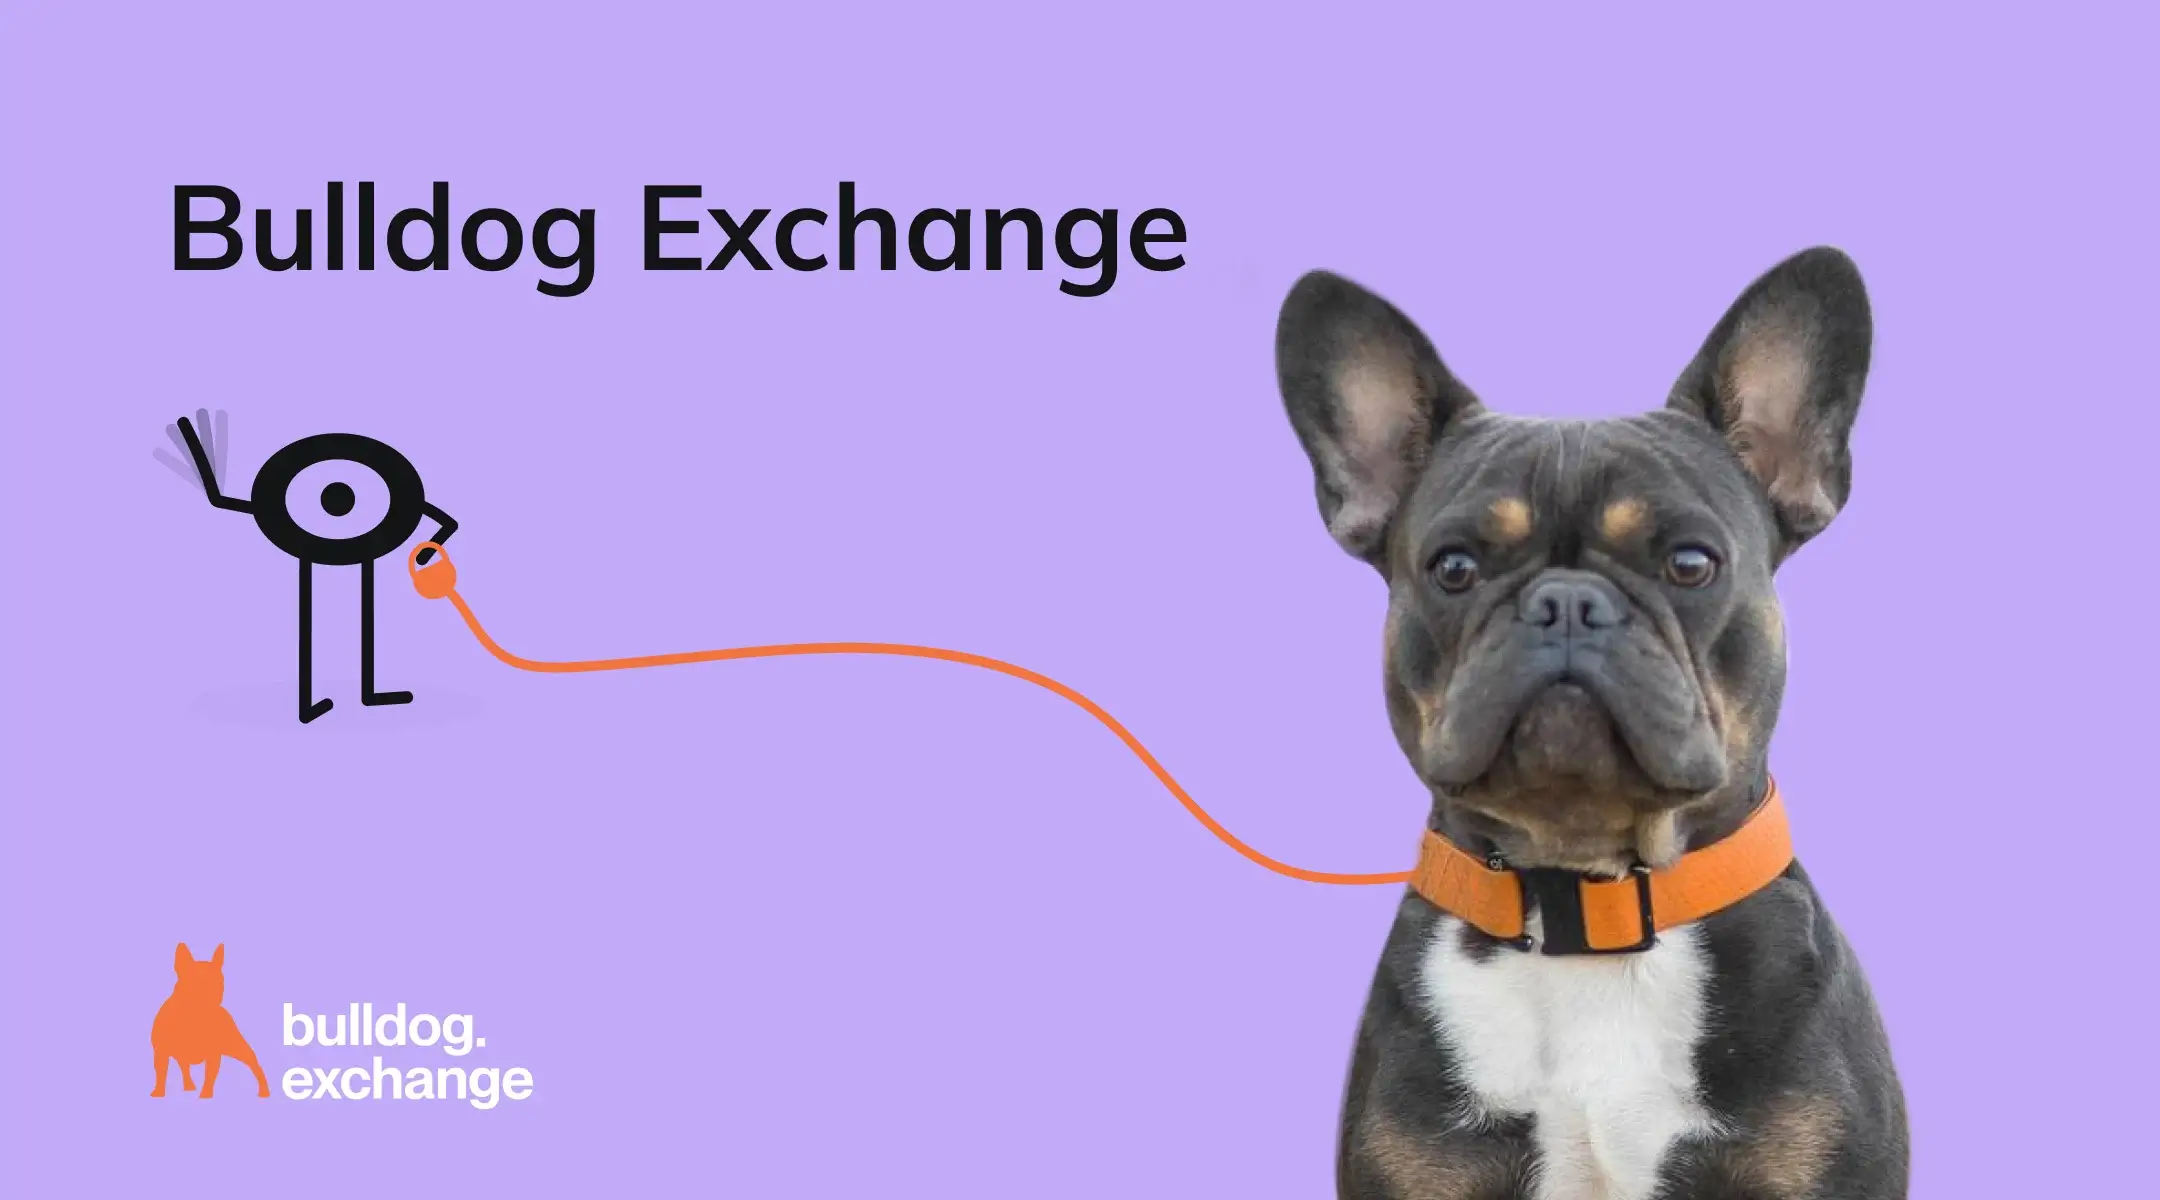 Bulldog Exchange: Why Was the Exchange Named After a Dog?